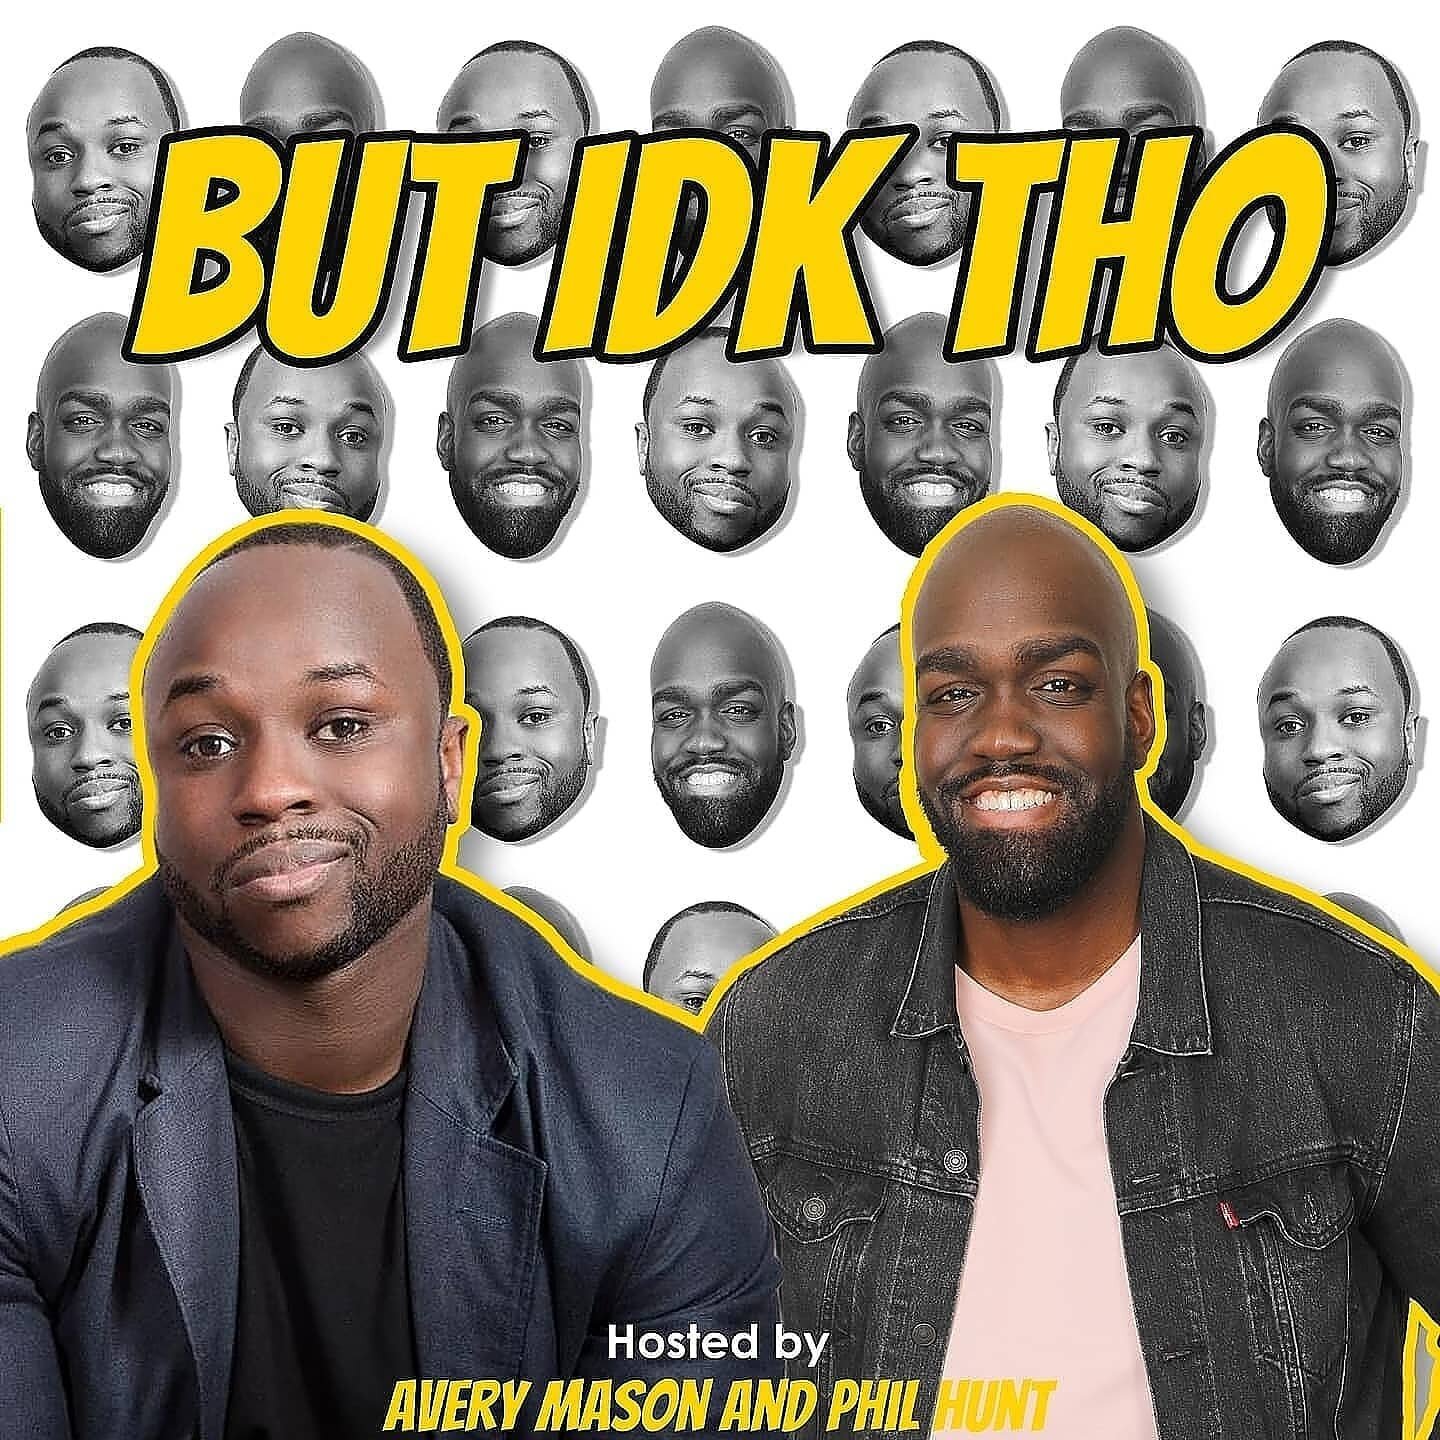 Get caught up #NOW
Episodes 1-19 of #butIDKtho the BEST WORST ADVICE PODCAST
Available now on all streaming platforms including #Itunes #AnchorFM #GooglePodcasts
🗣️LIKE, SHARE, SUBSCRIBE
Hosted by me and @iamphilhunt 
#LeaveYourFeelingsAtHome
#podca